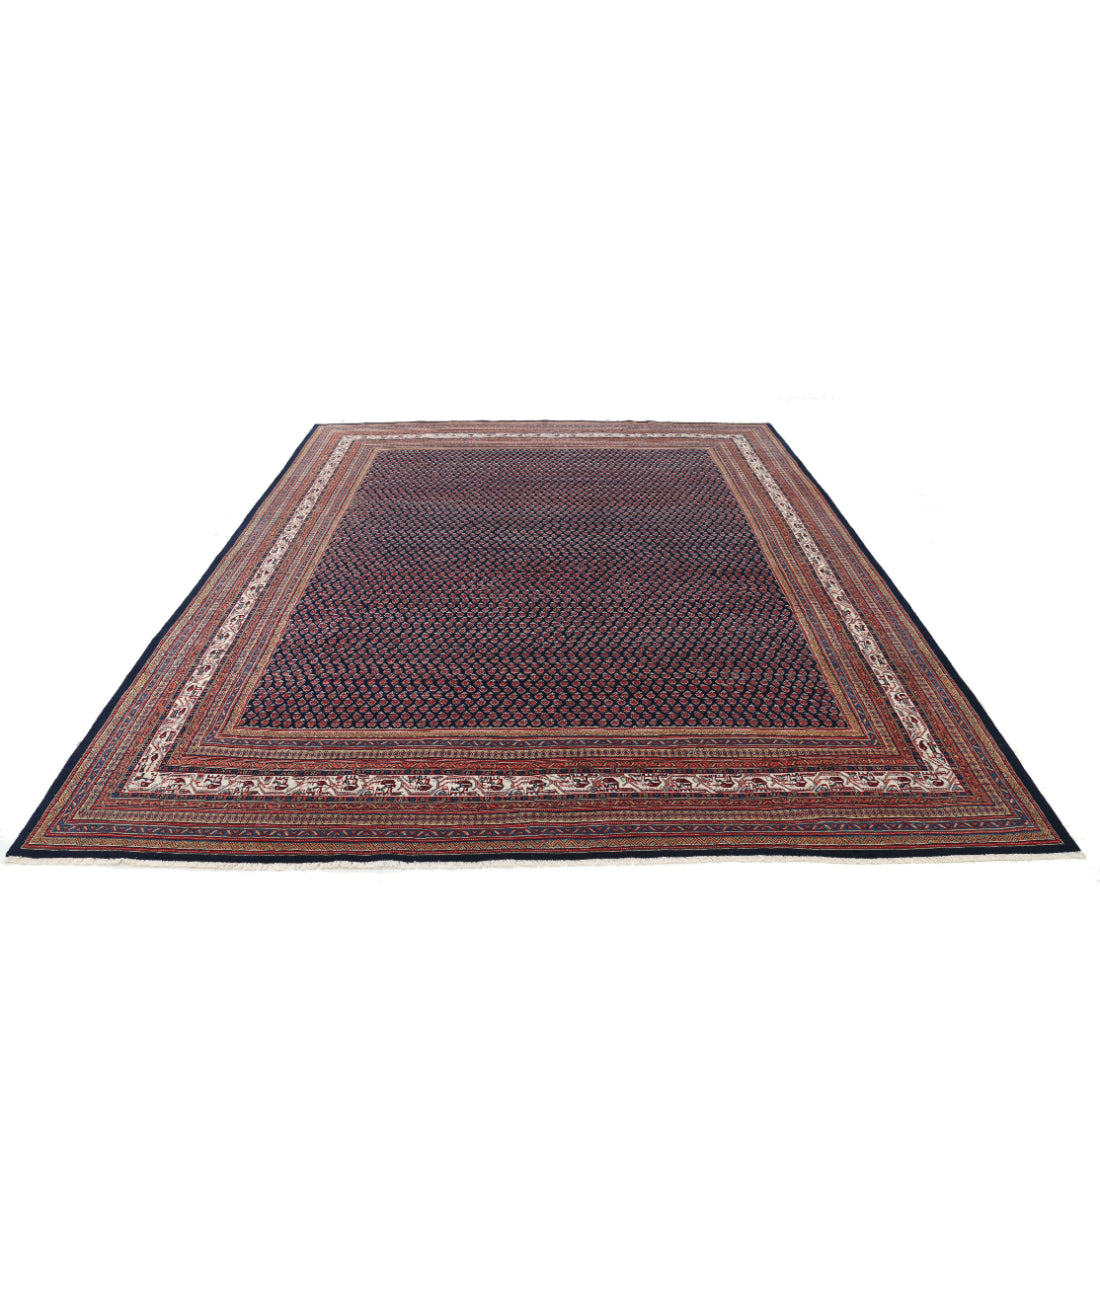 Hand Knotted Persian Mir Saraband Wool Rug - 9'0'' x 11'4'' 9'0'' x 11'4'' (270 X 340) / Blue / Beige